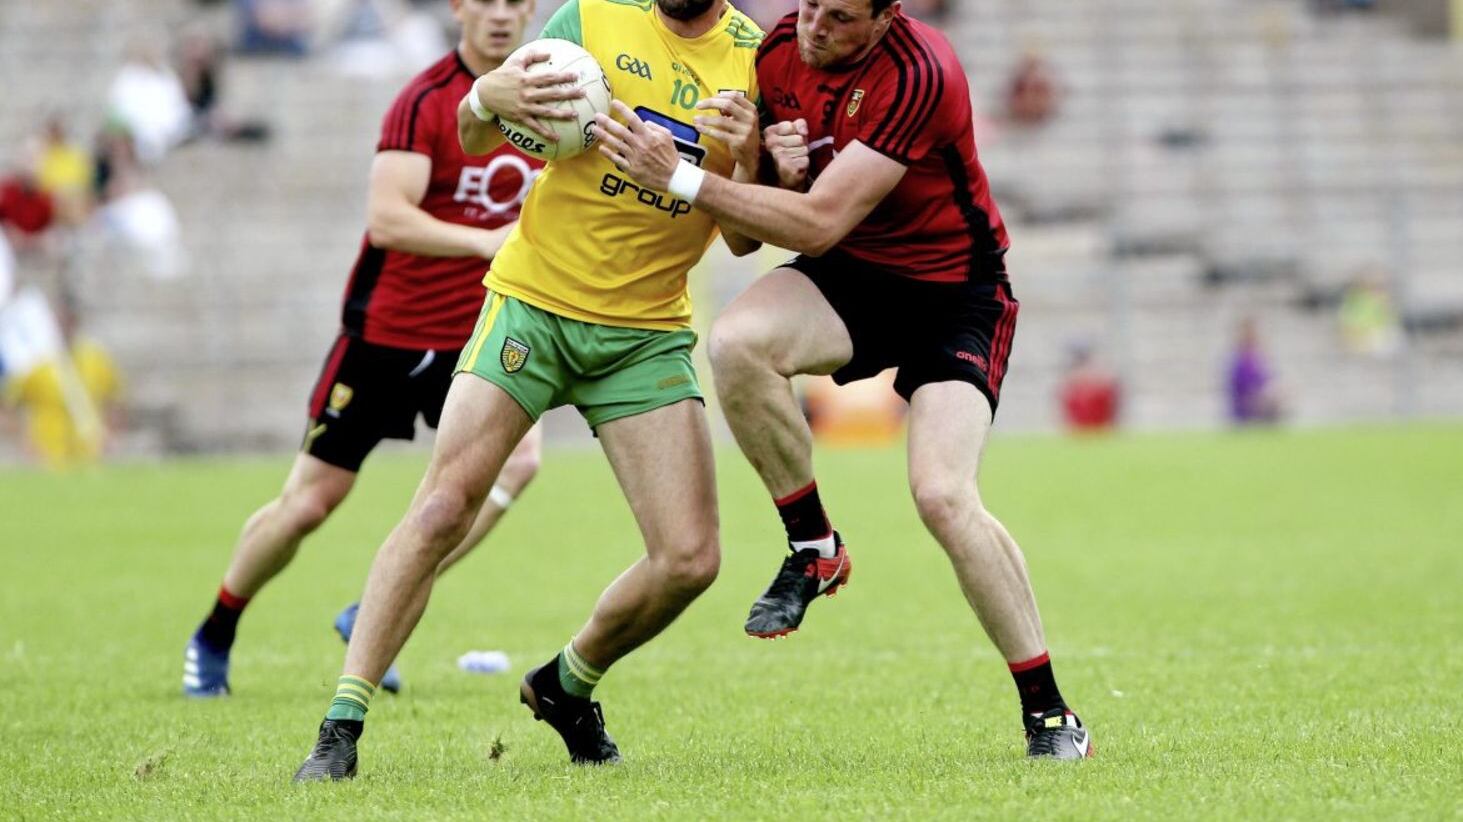 Odhr&aacute;n MacNiallais last played for Donegal in 2018, and the more time passes, the less likely it seems we&#39;ll see him back in the county colours again. Picture by Seamus Loughran 